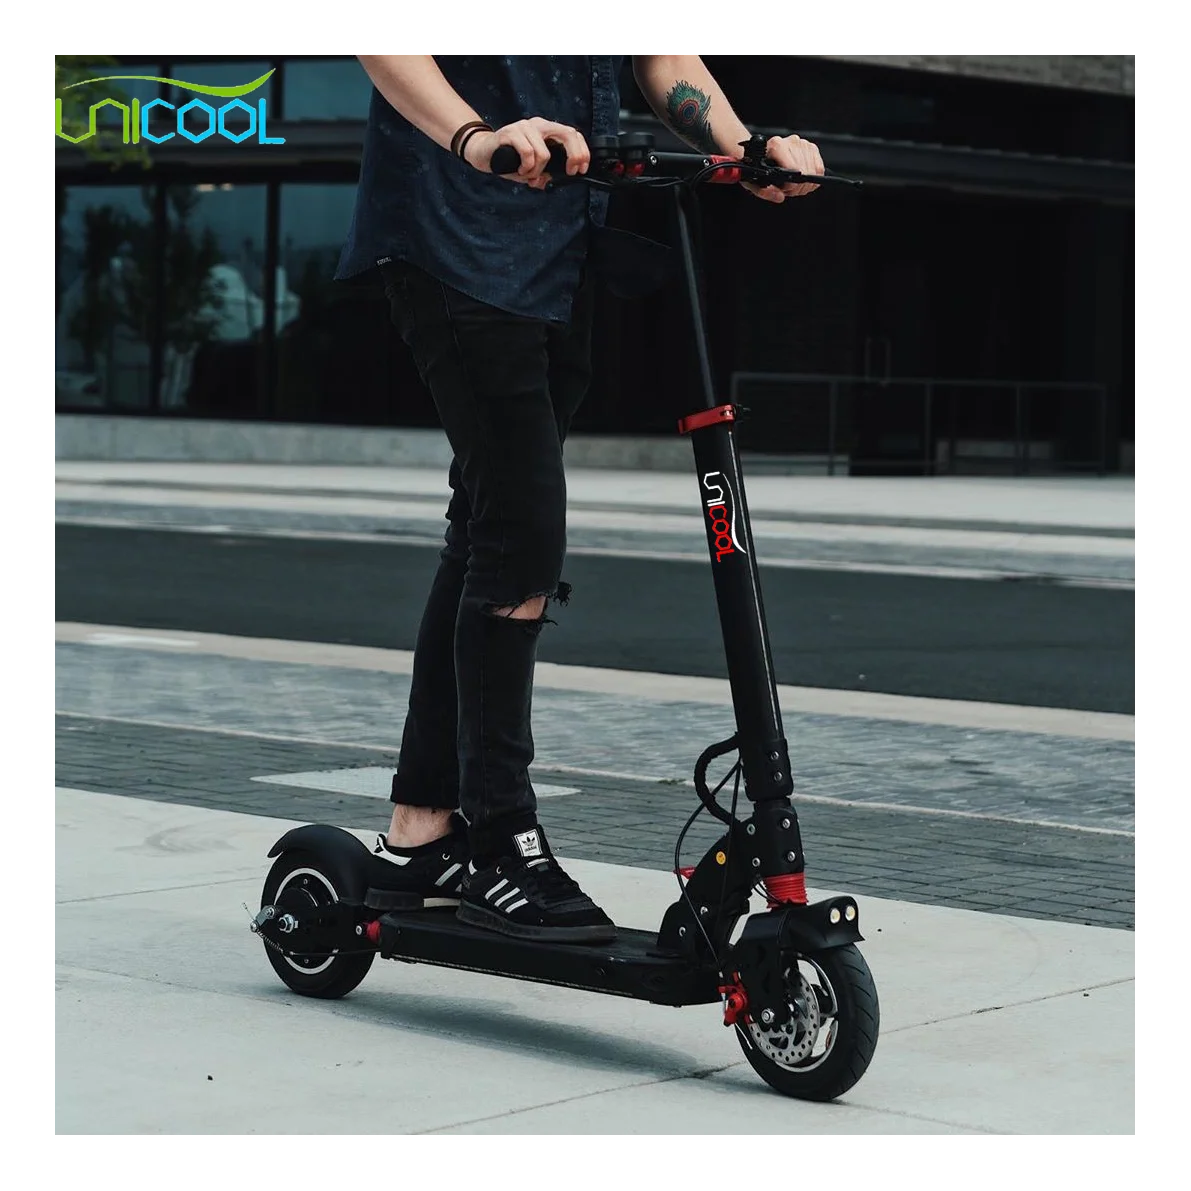 Unicool escooter boosted 600w 48V rev electric scooter e step for zero 9